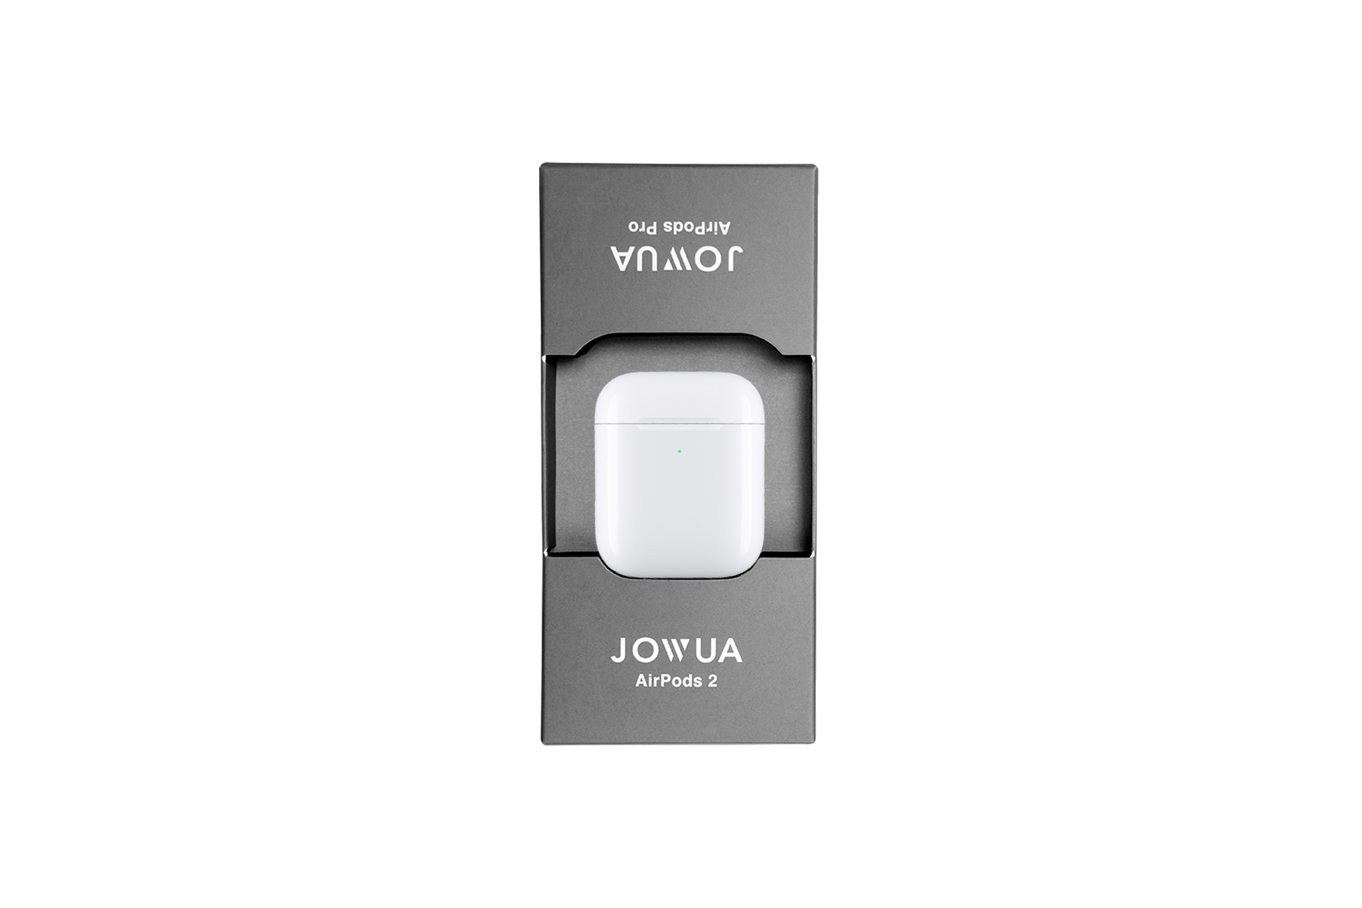 Jowua AirPods Charger Stand